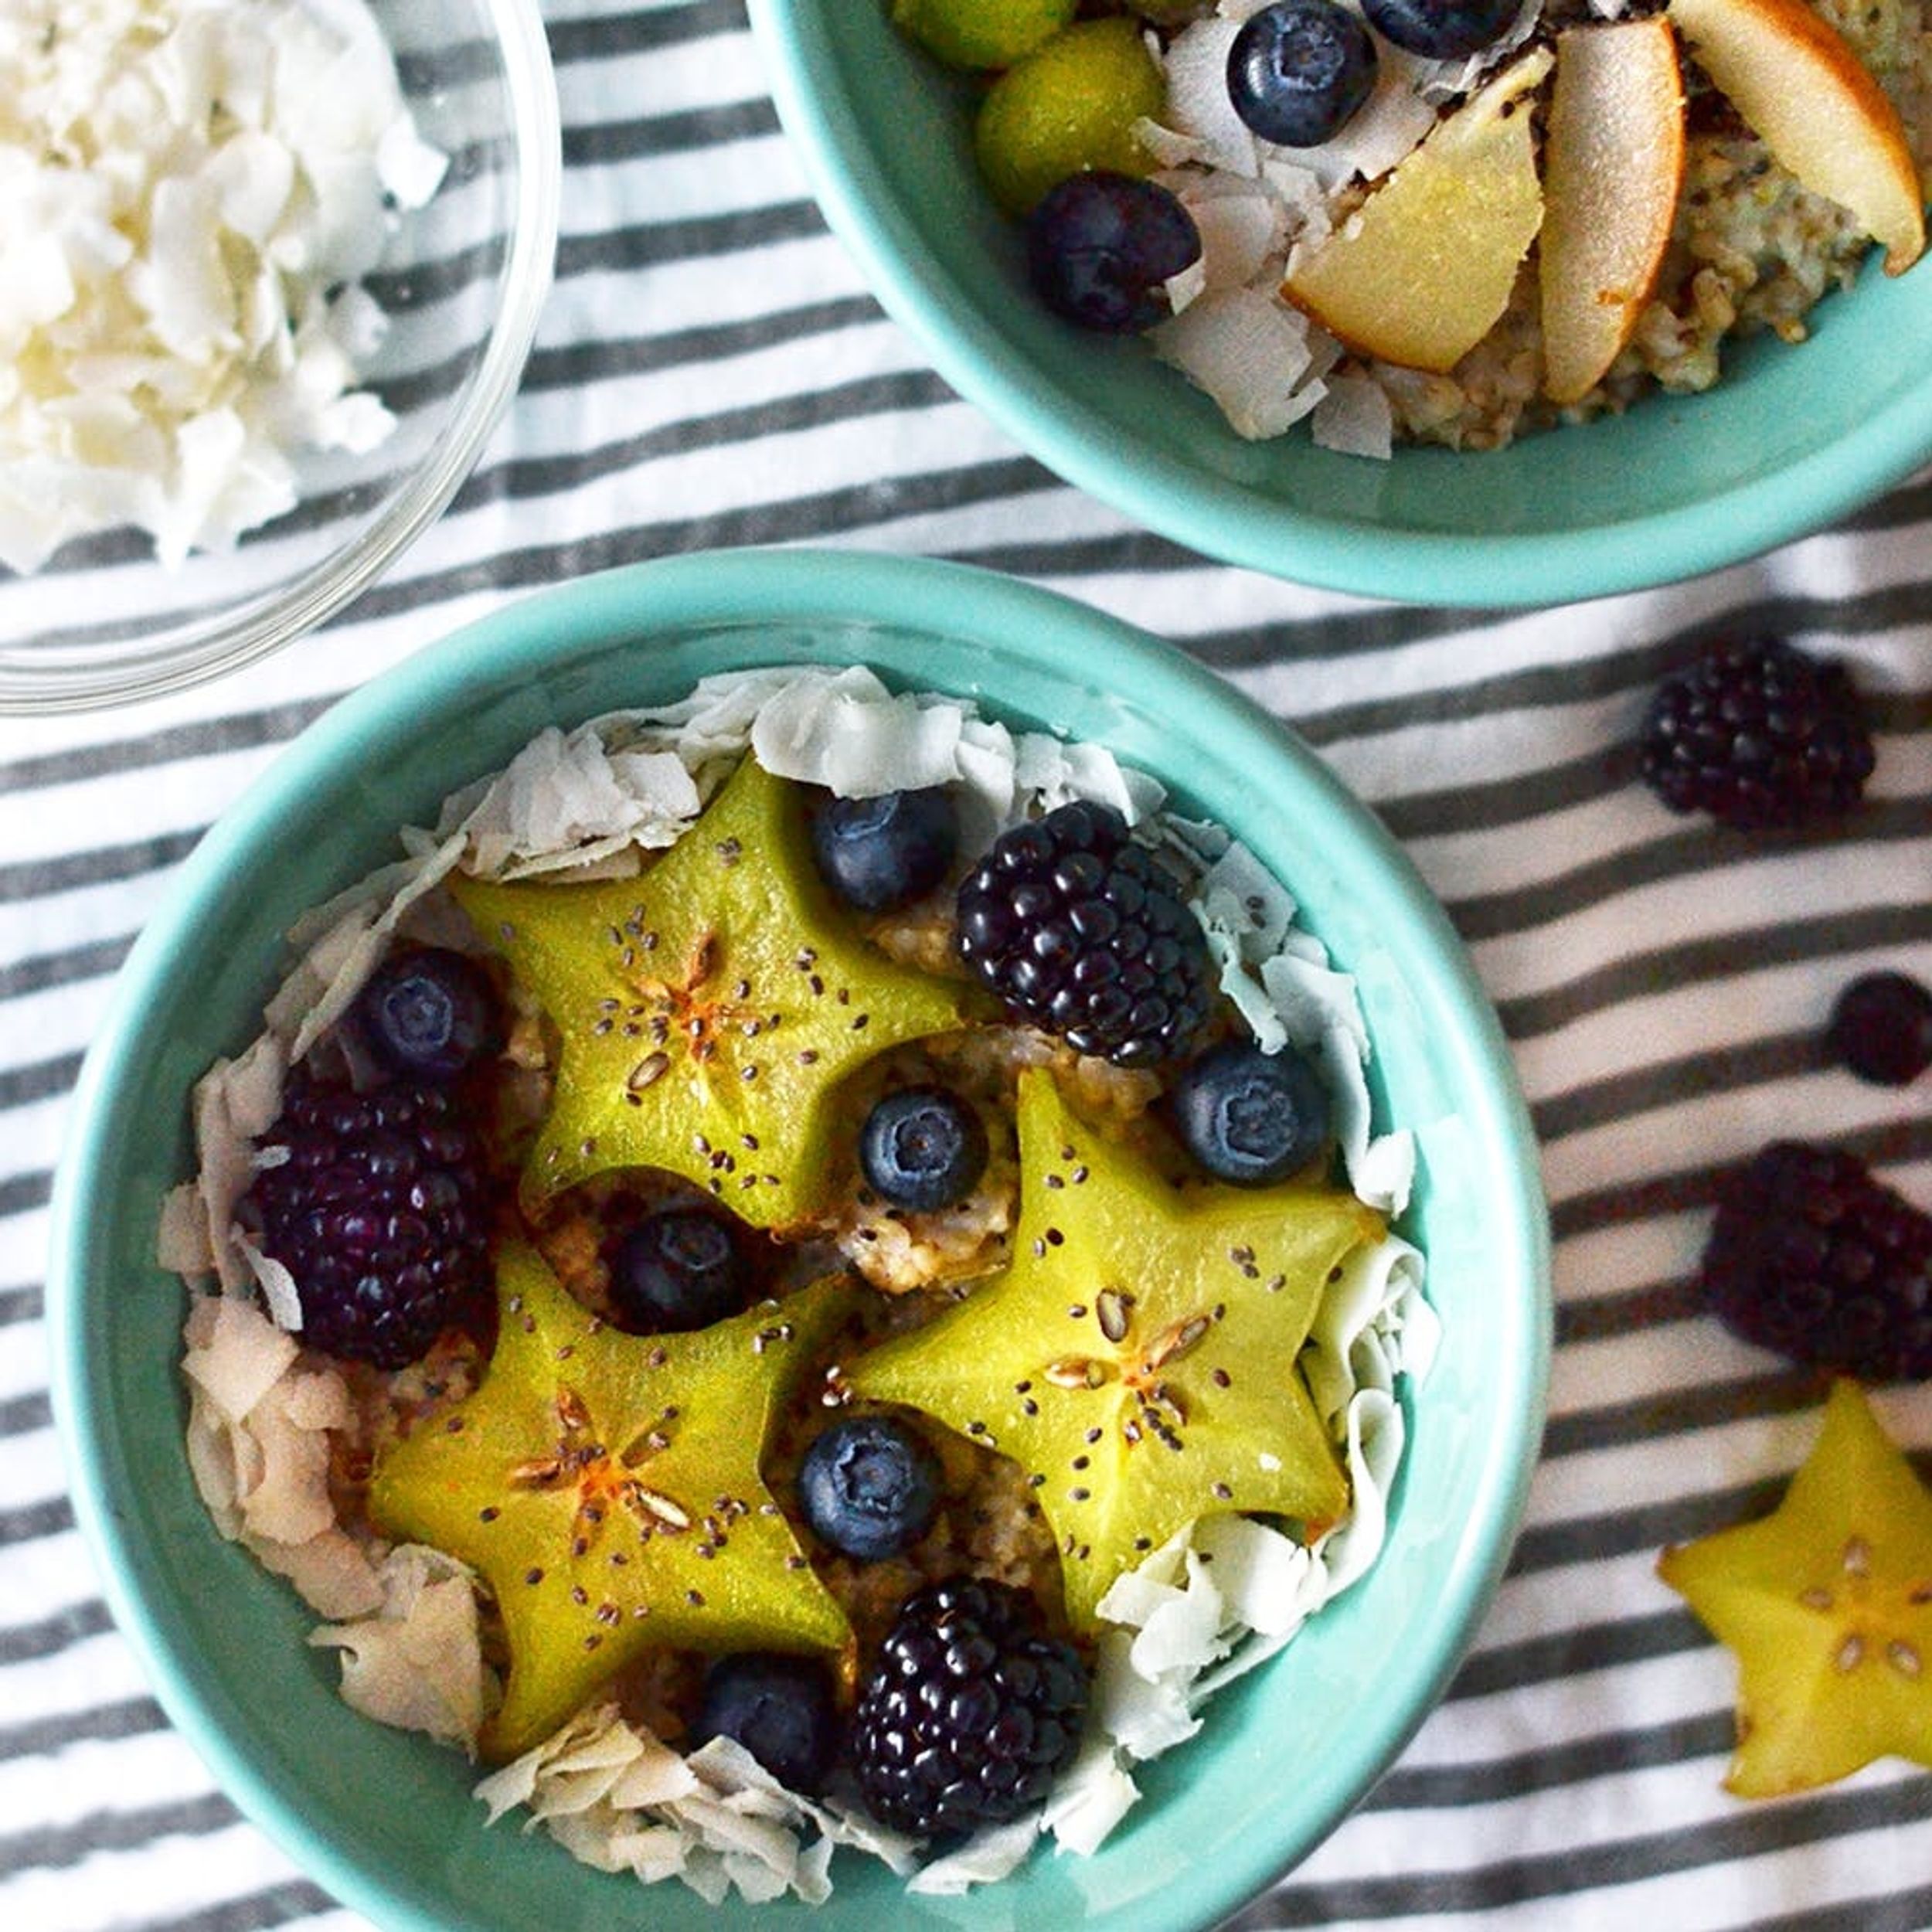 #Oatporn Is the Latest Instagram Food Trend We’re Not Even Mad About